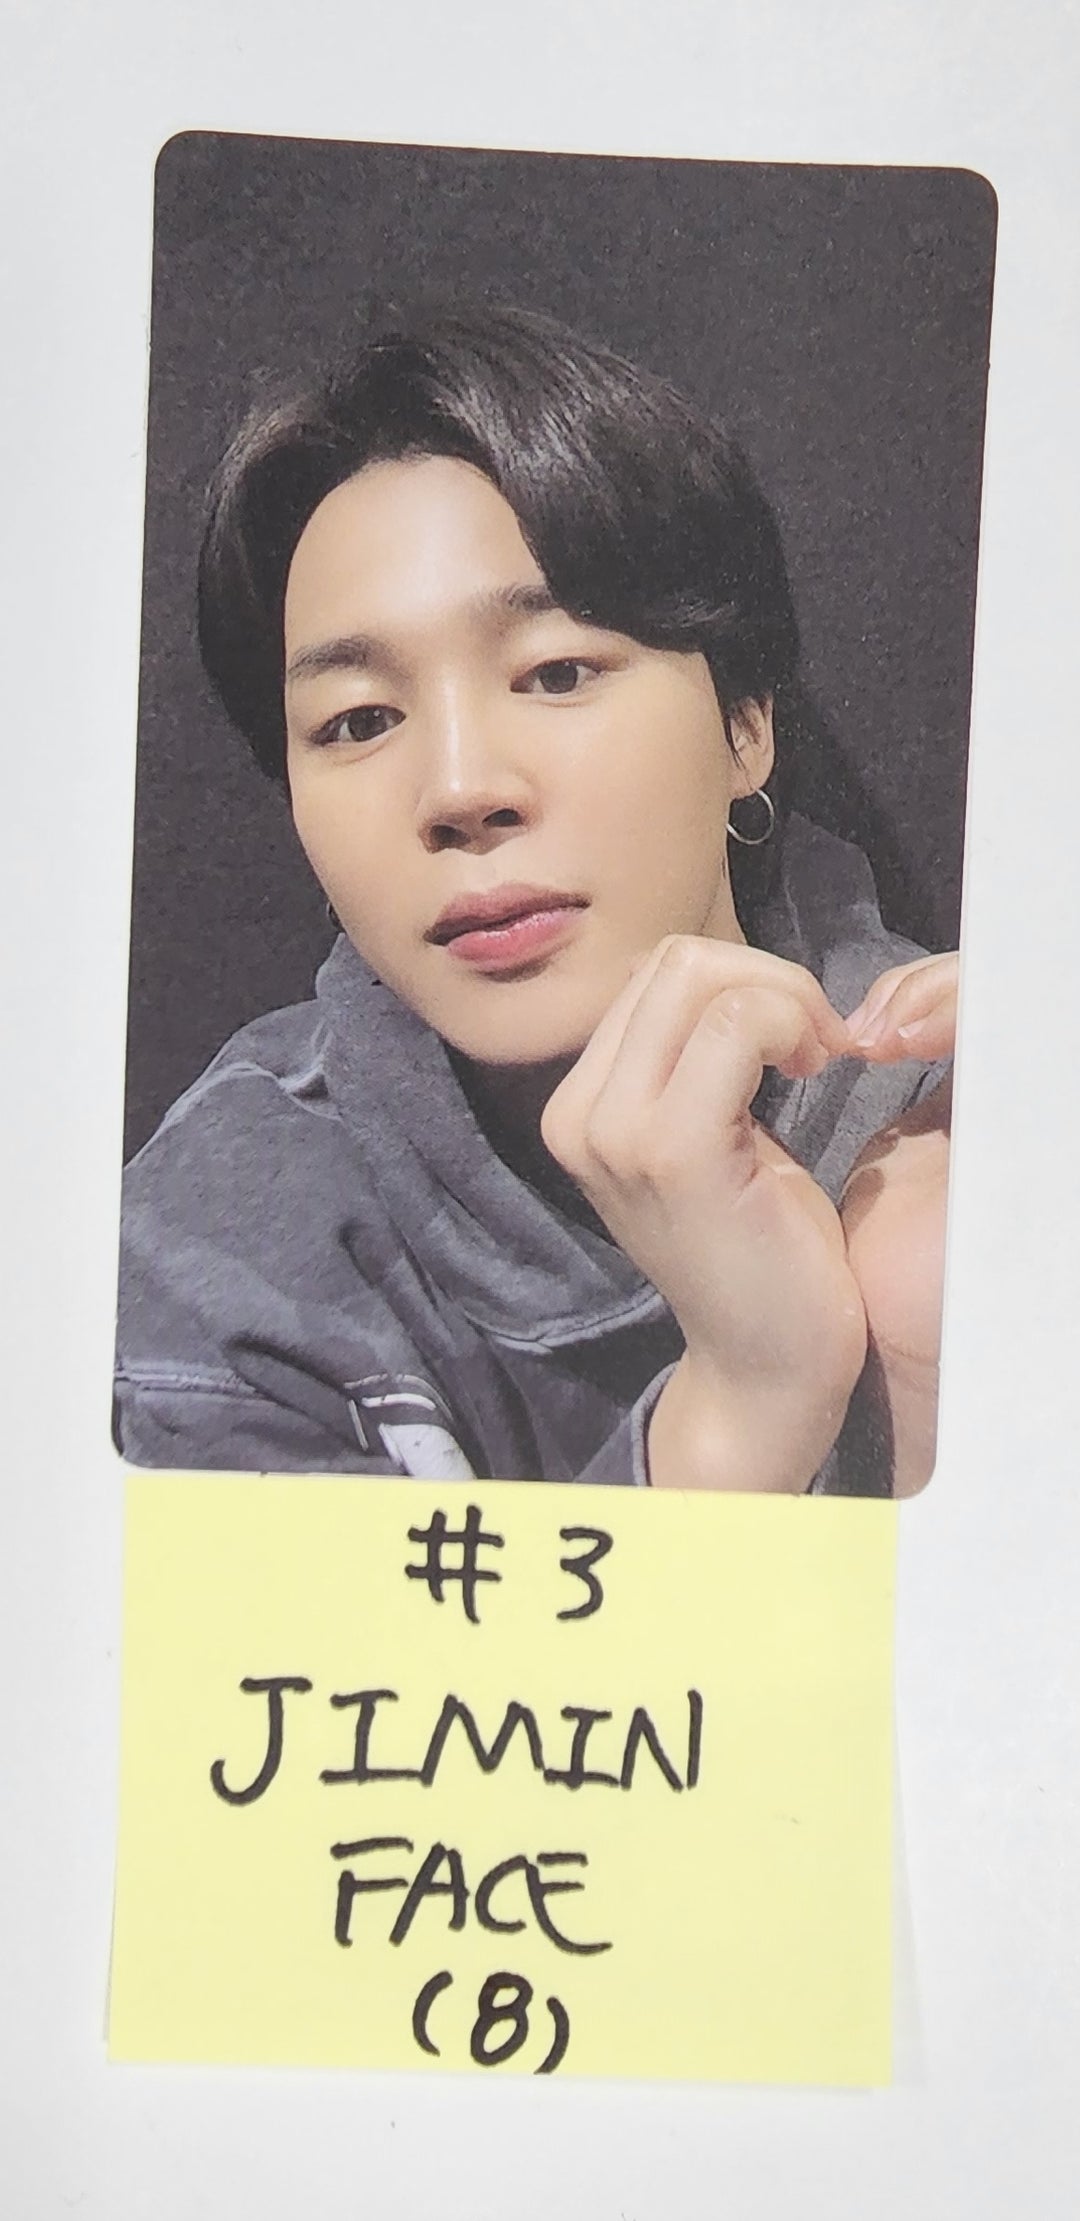 Jimin (Of BTS) "FACE" - Official Photocard